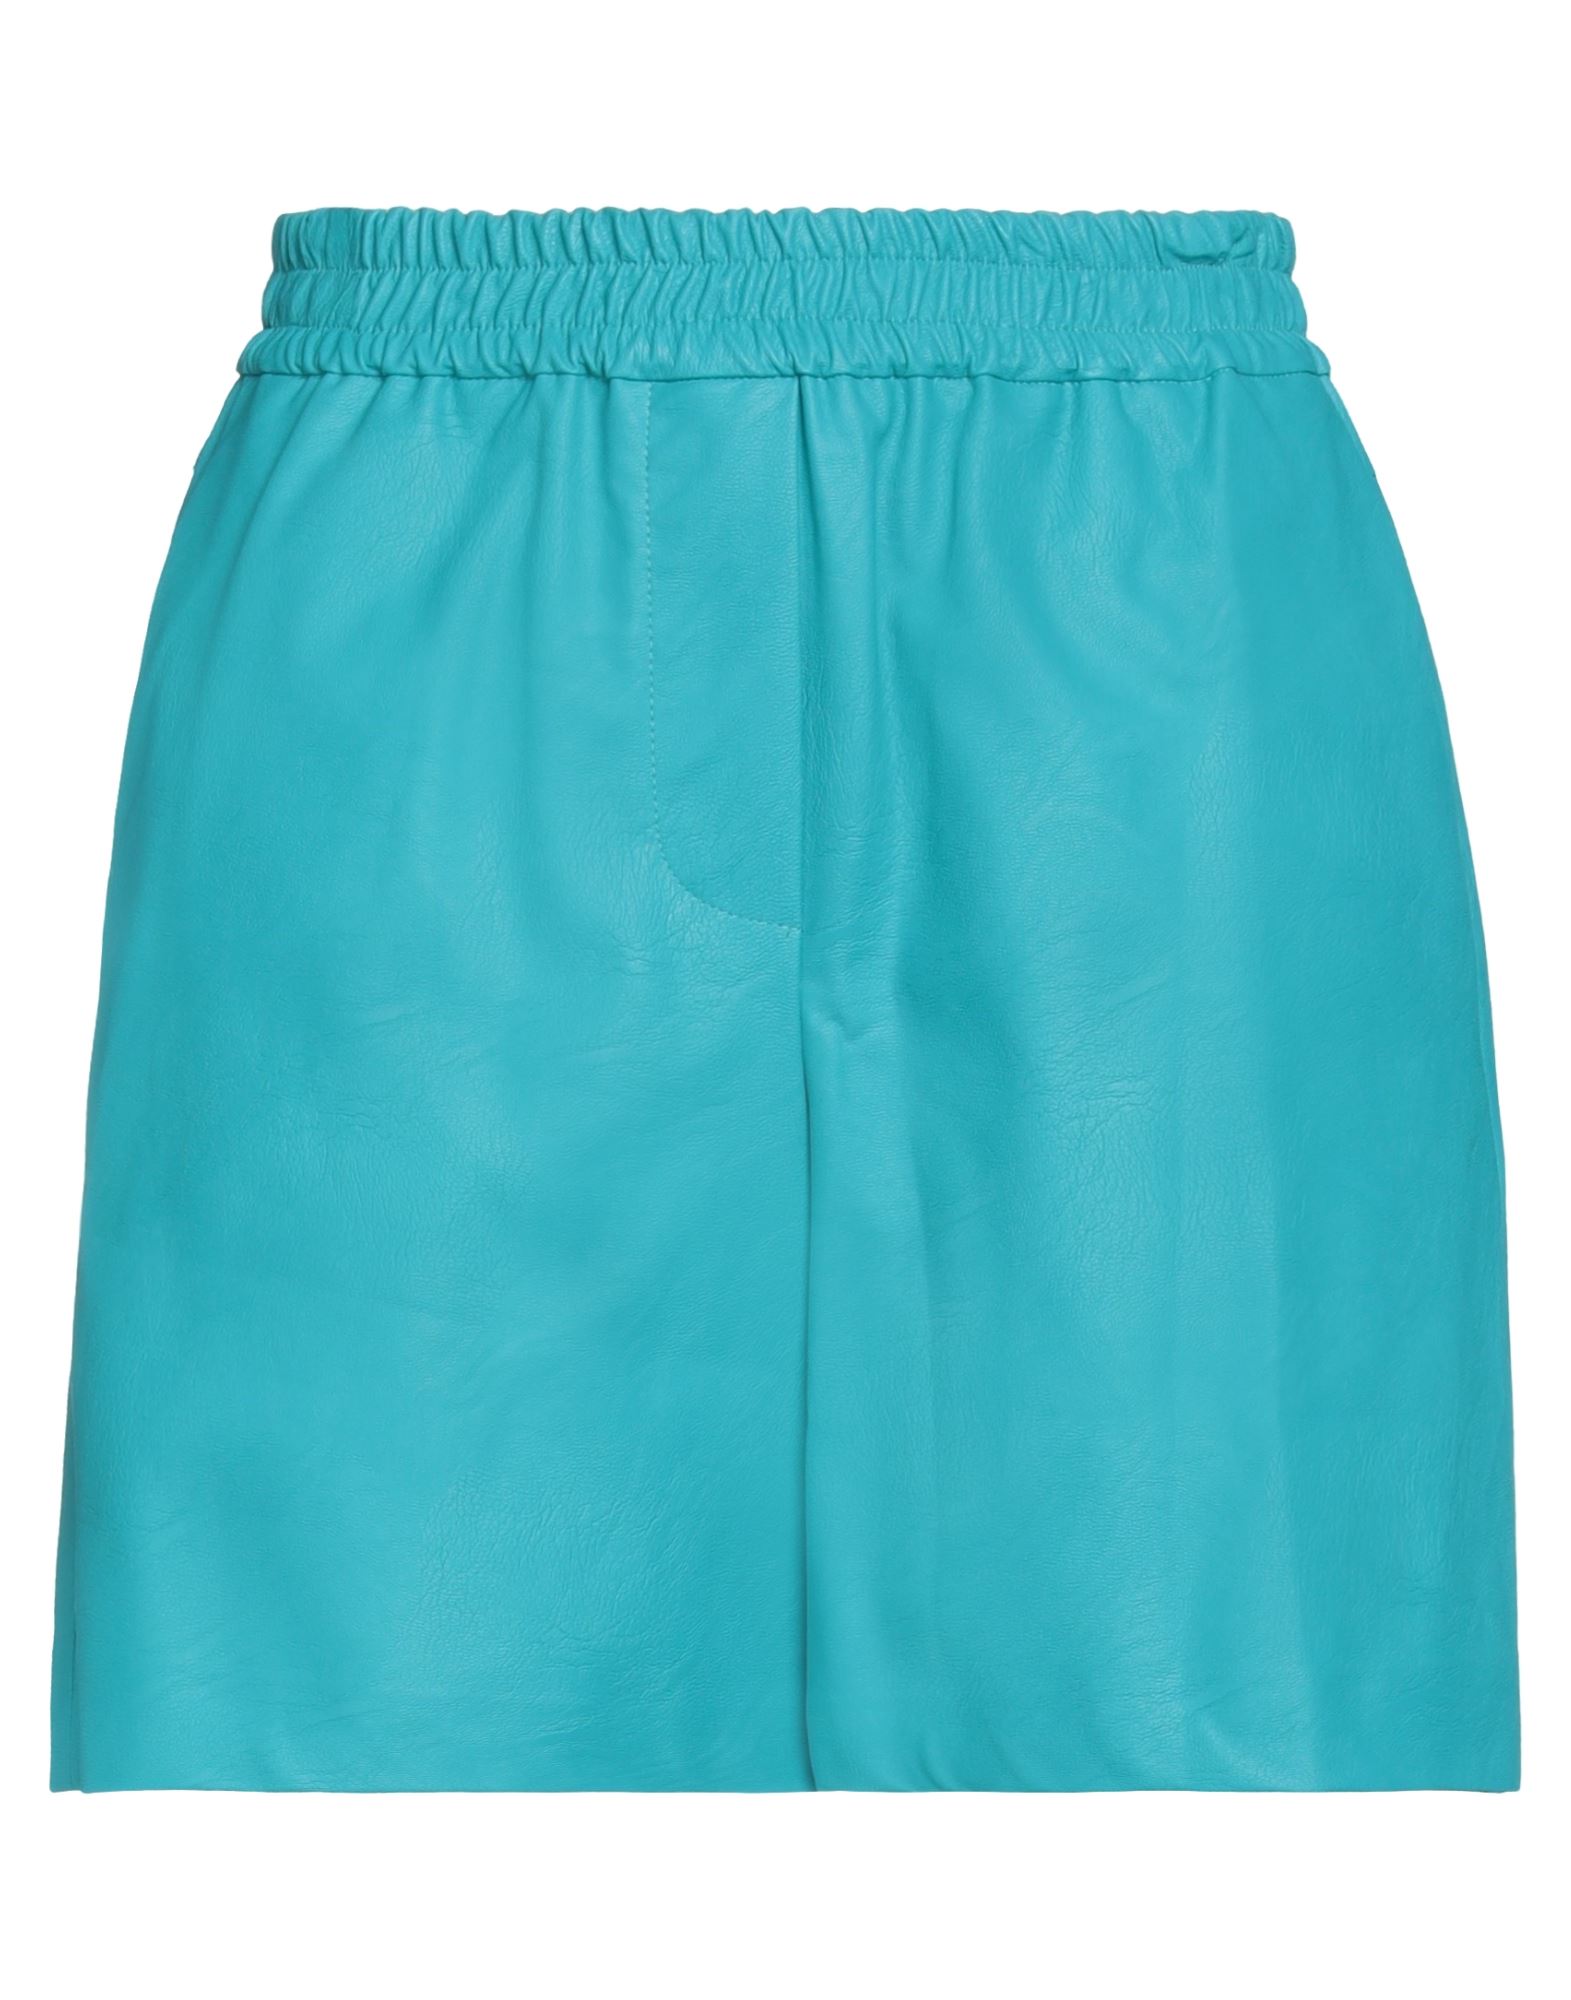 Nude Woman Shorts & Bermuda Shorts Turquoise Size 8 Polyurethane, Polyester In Blue